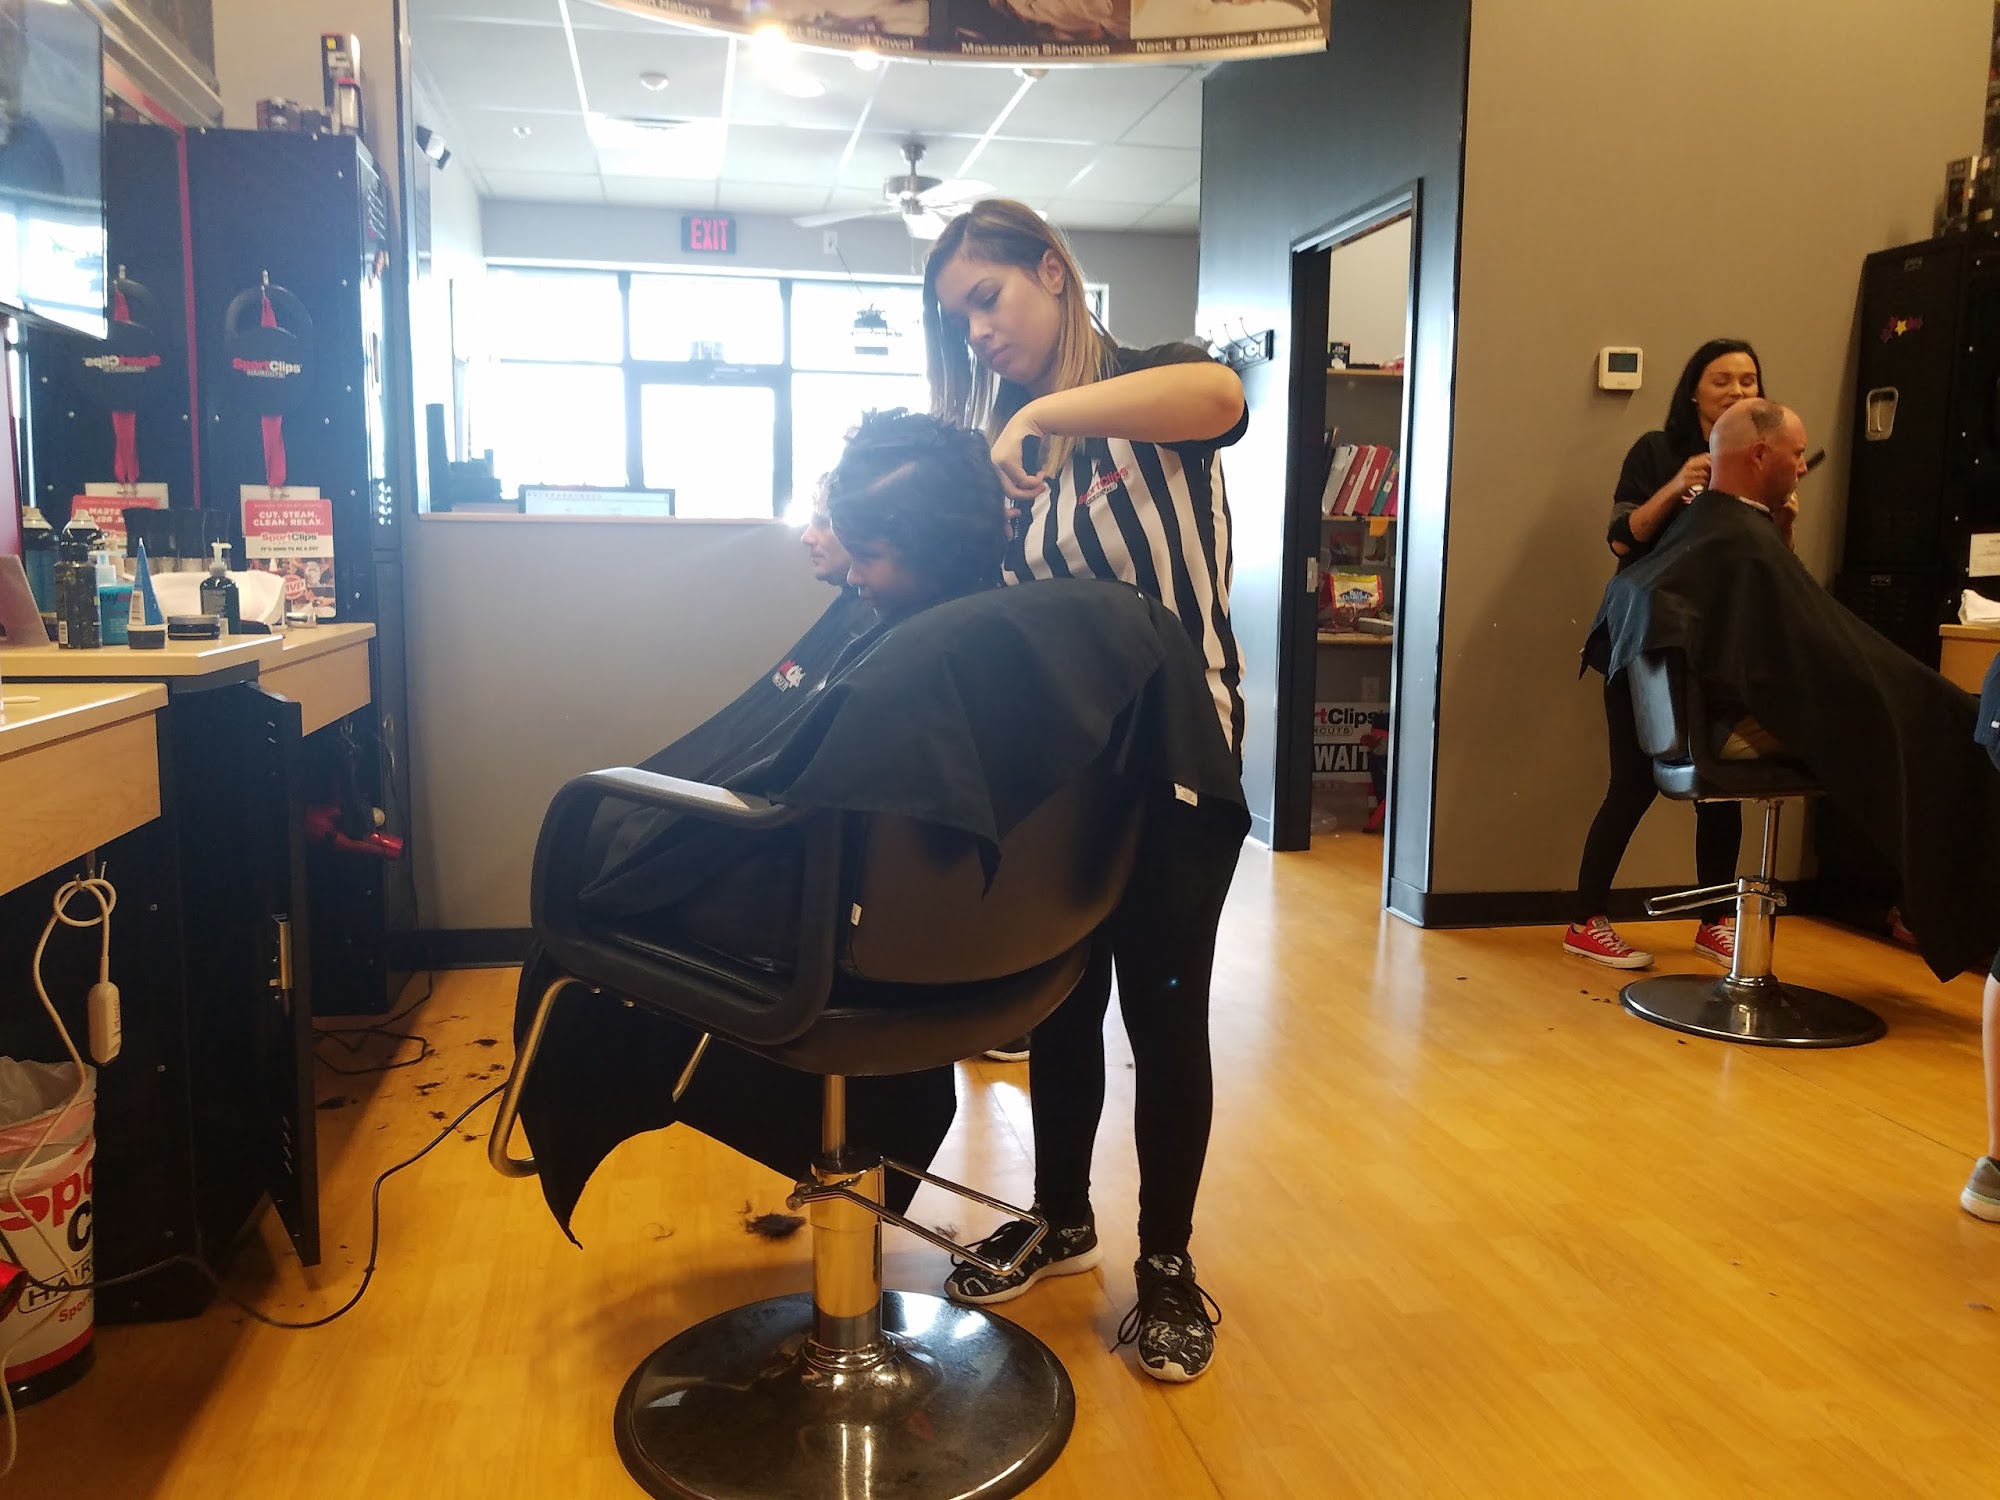 Sport Clips Haircuts of Haslet 13100 N, US-287 Suite #130, Haslet Texas 76052